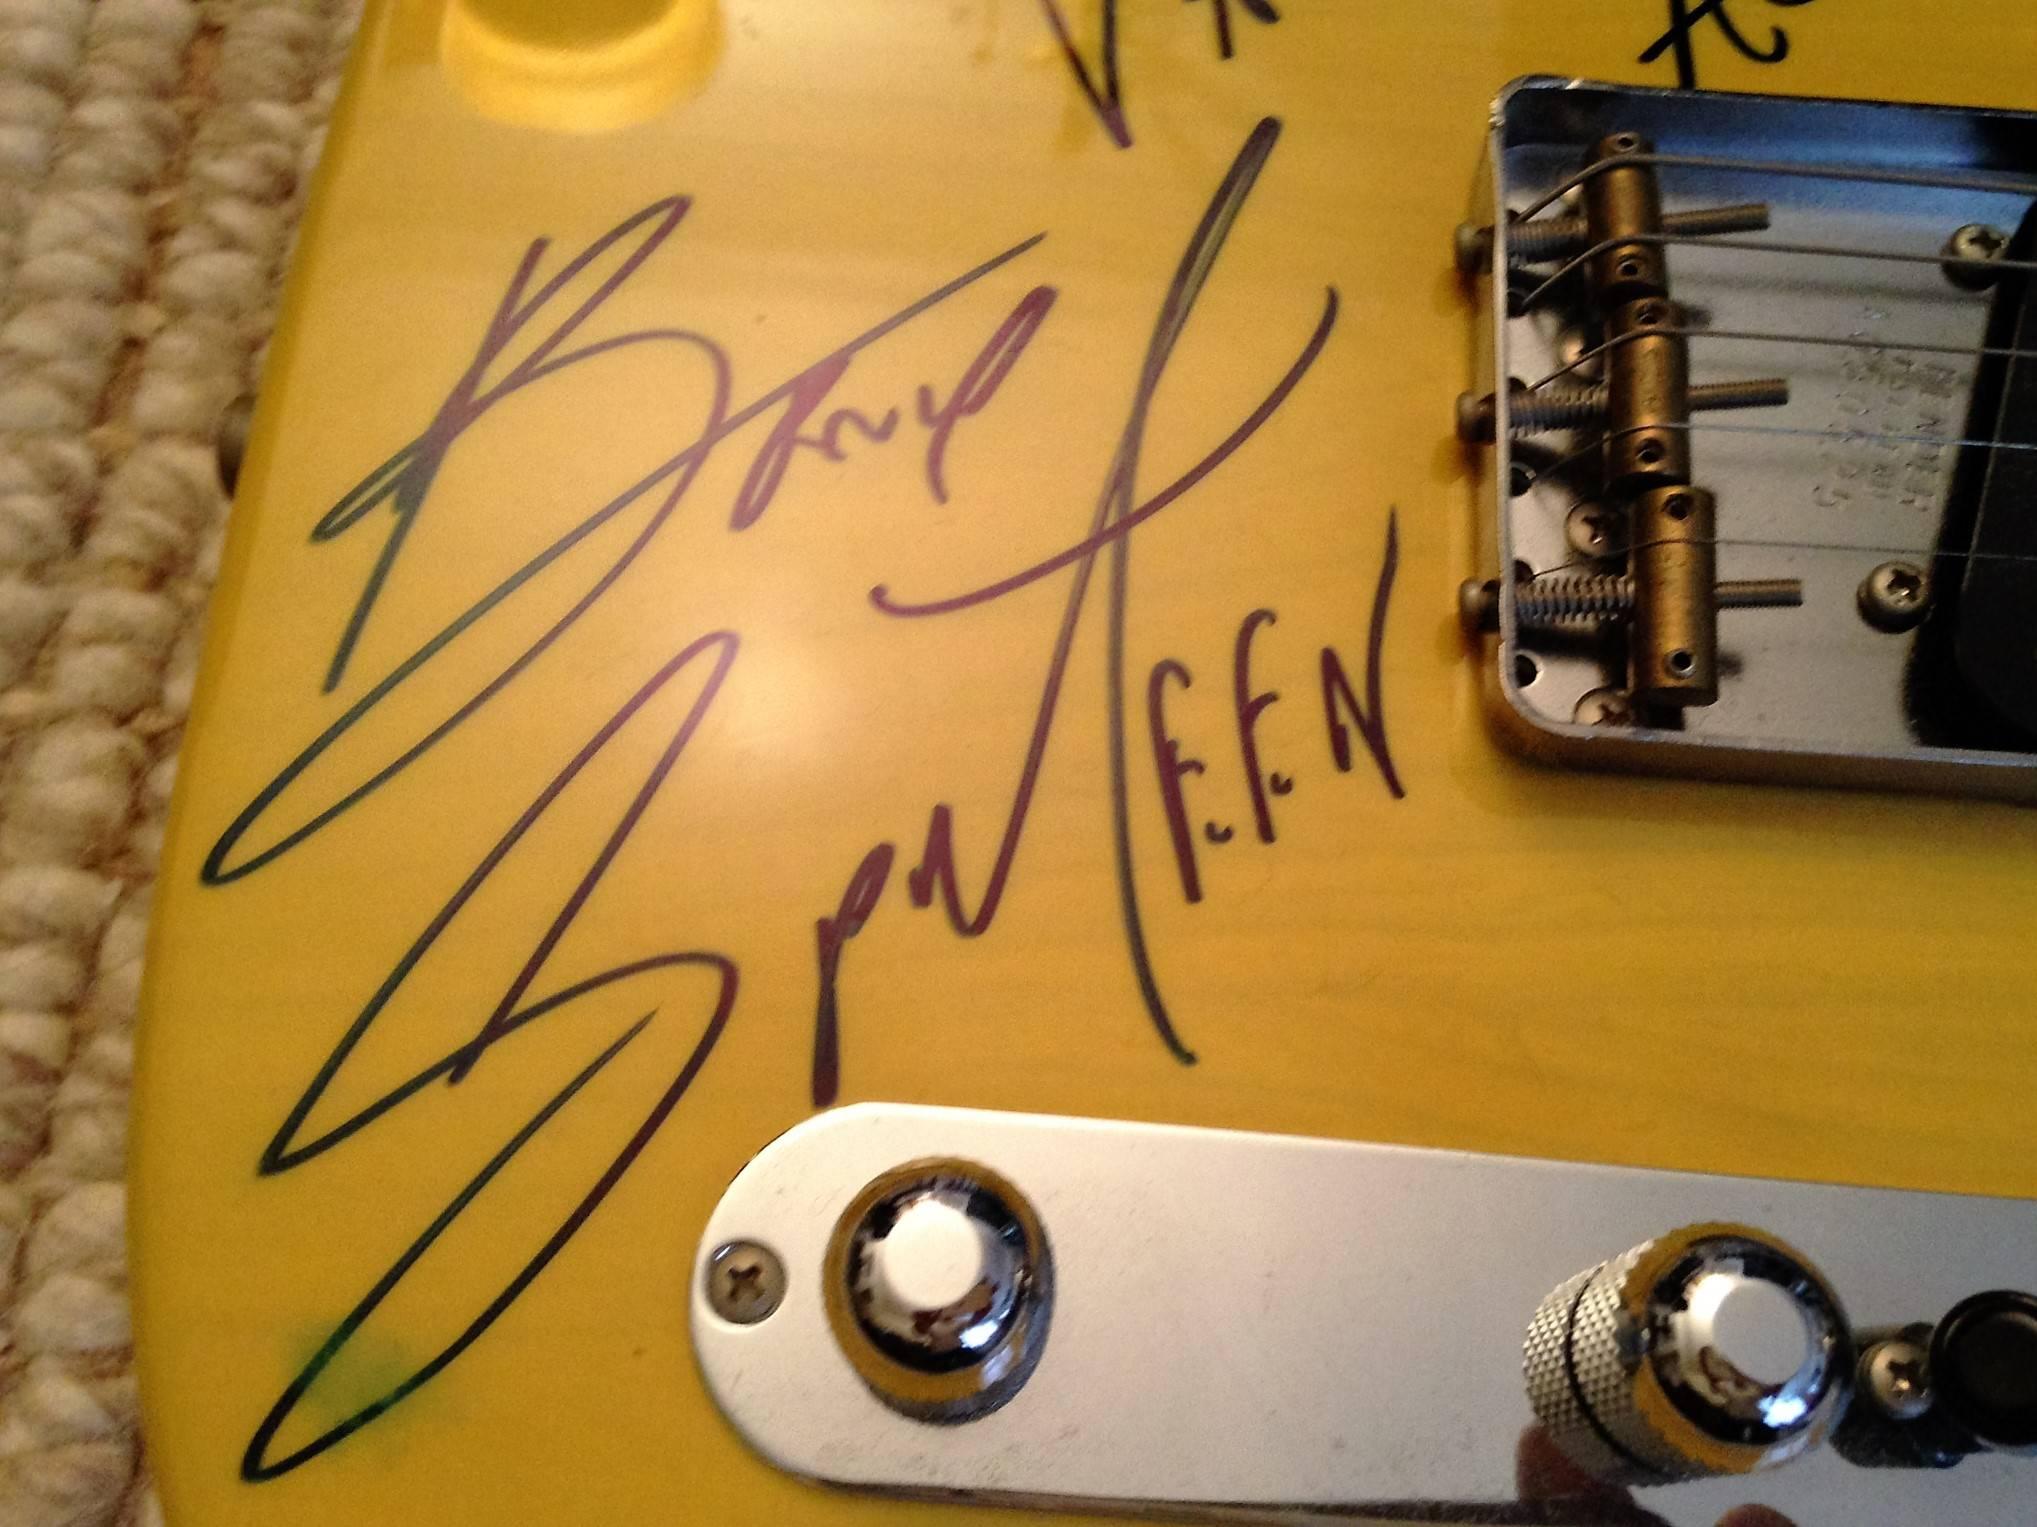 American Fender Telecaster Guitar Autographed by Bruce Springsteen For Sale